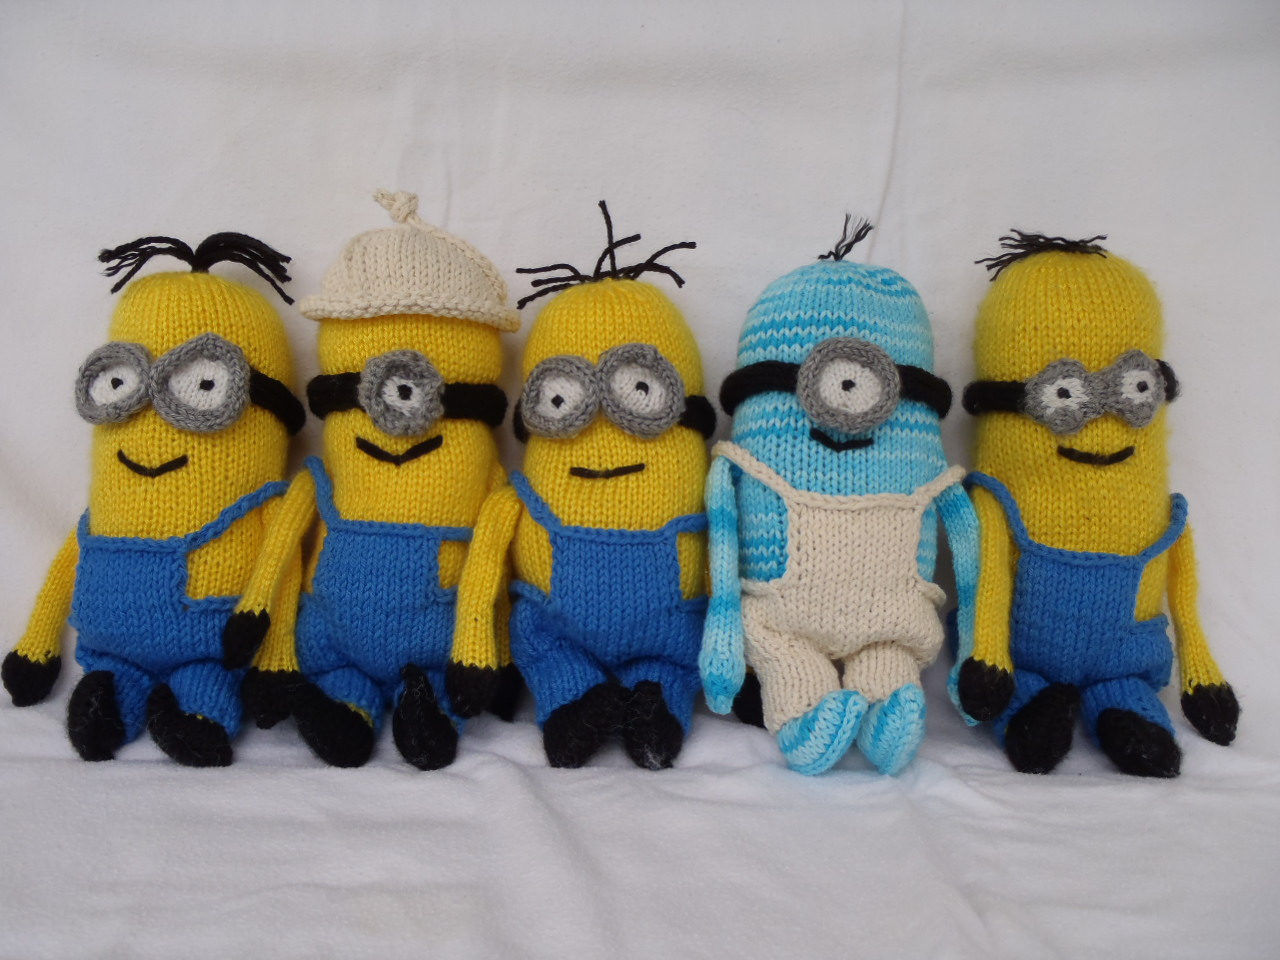 Knitting Patterns For Minions Stanas Critters Etc Knitting Pattern For Minions Part 2